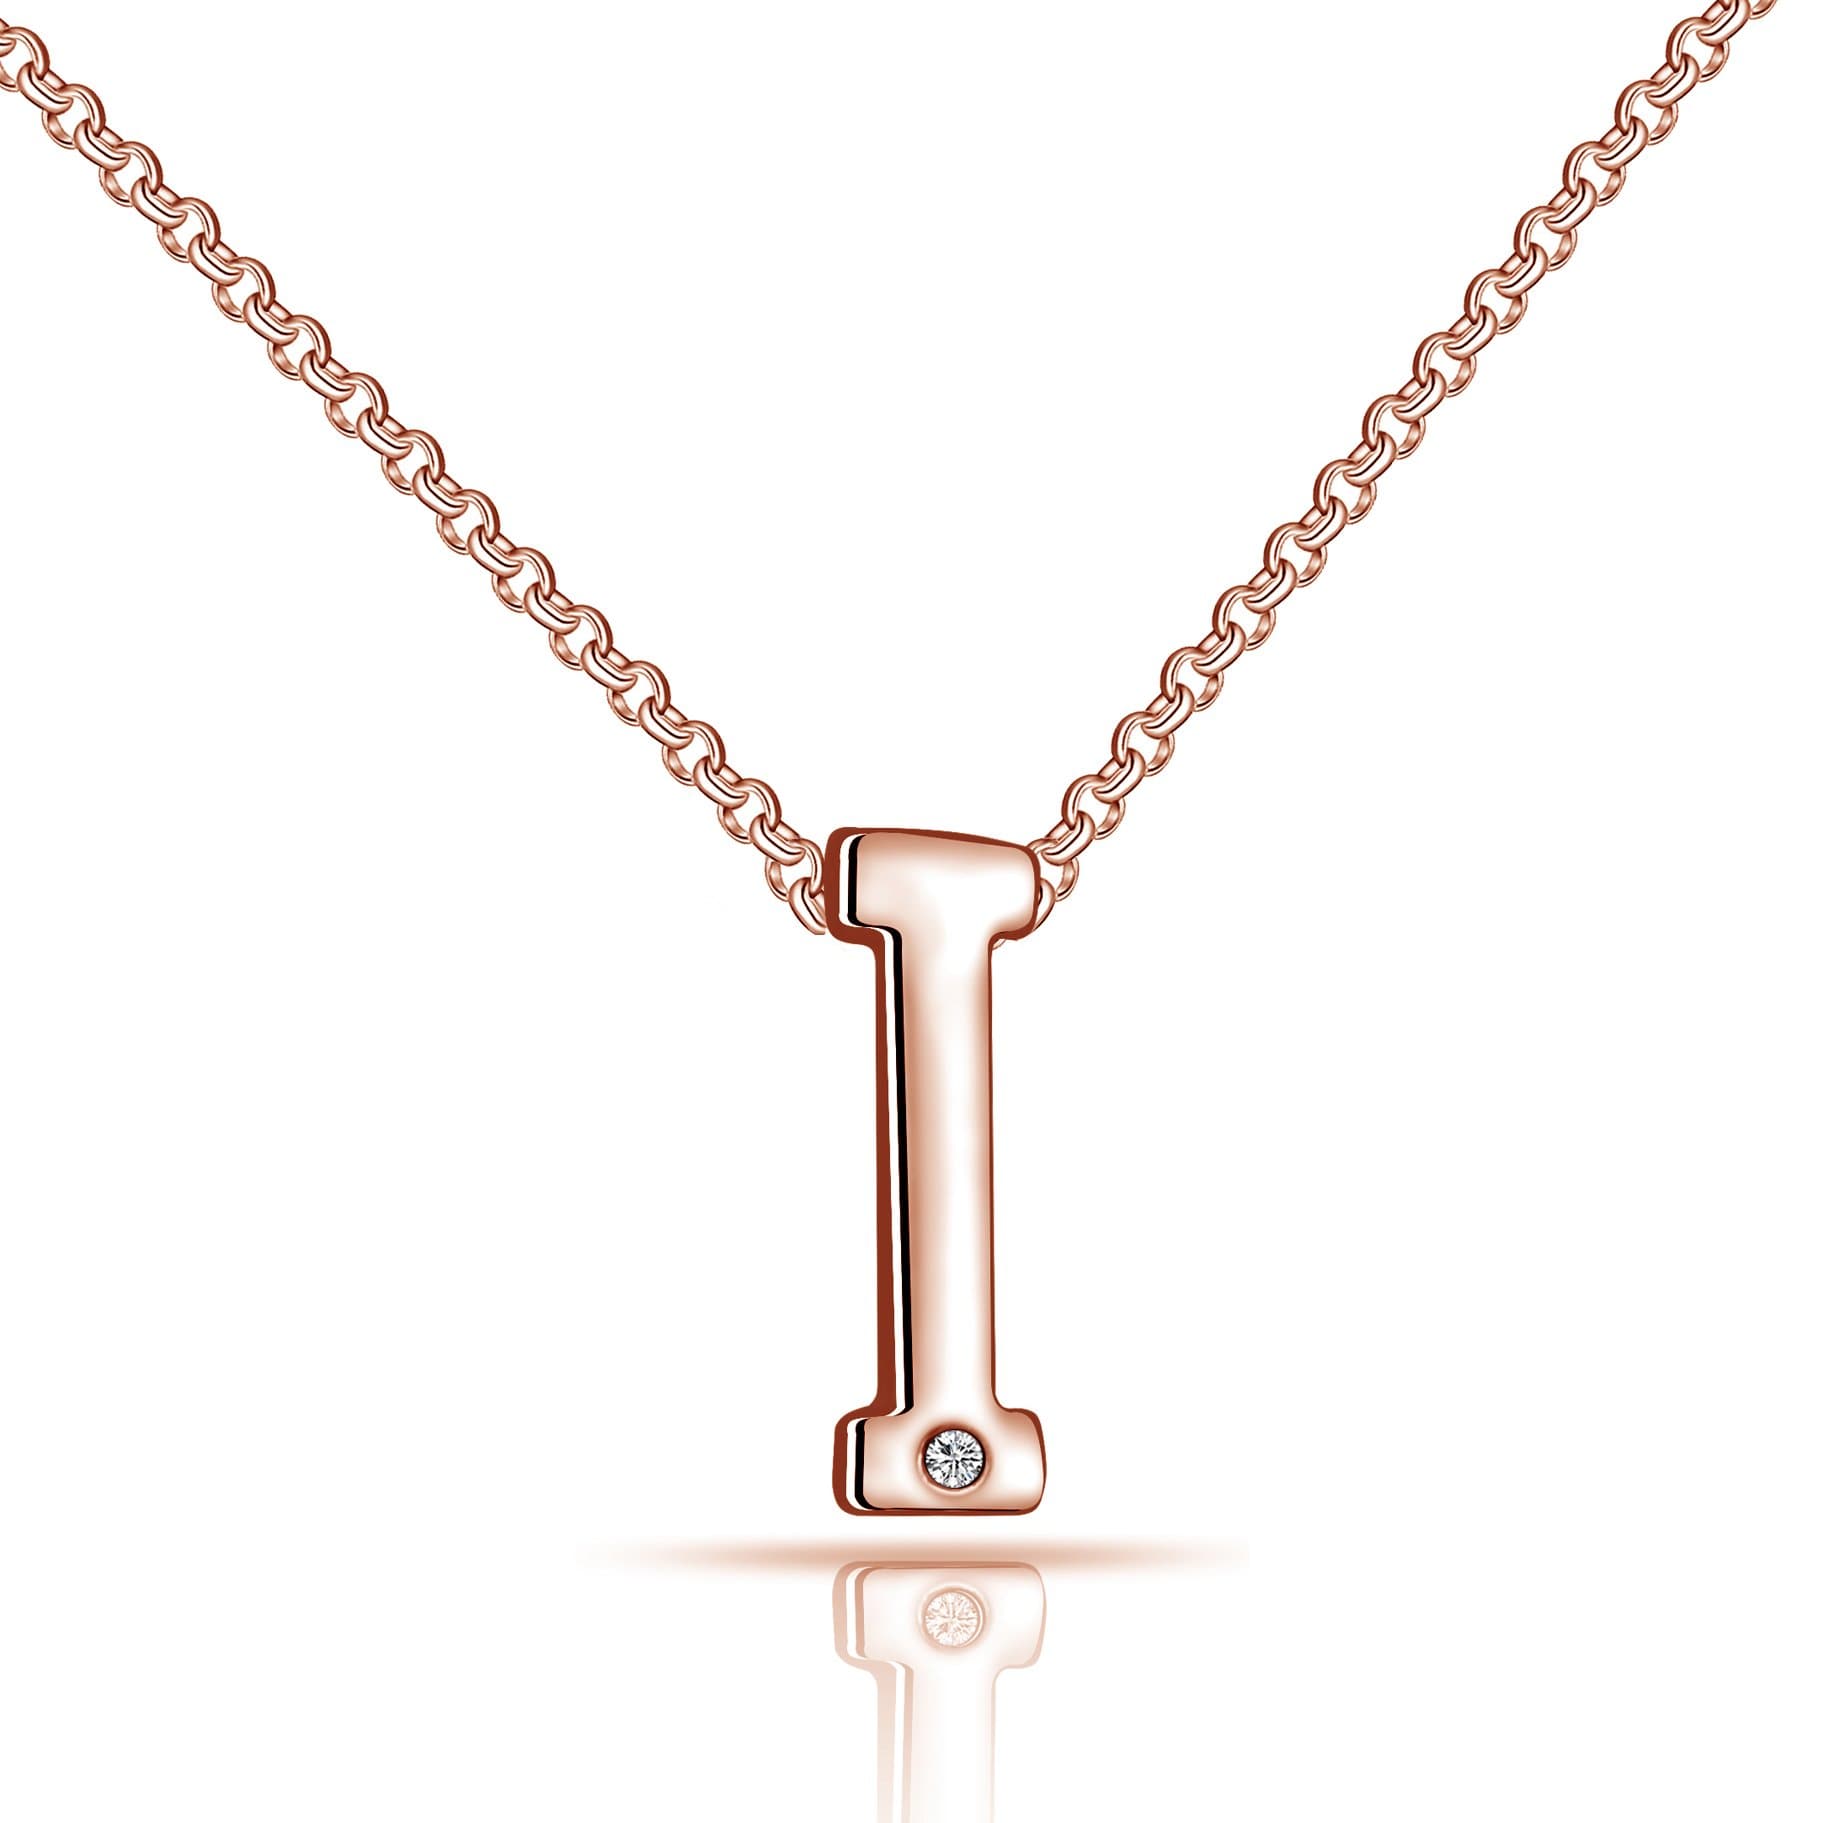 Silver necklace with letter-pendant L – THOMAS SABO